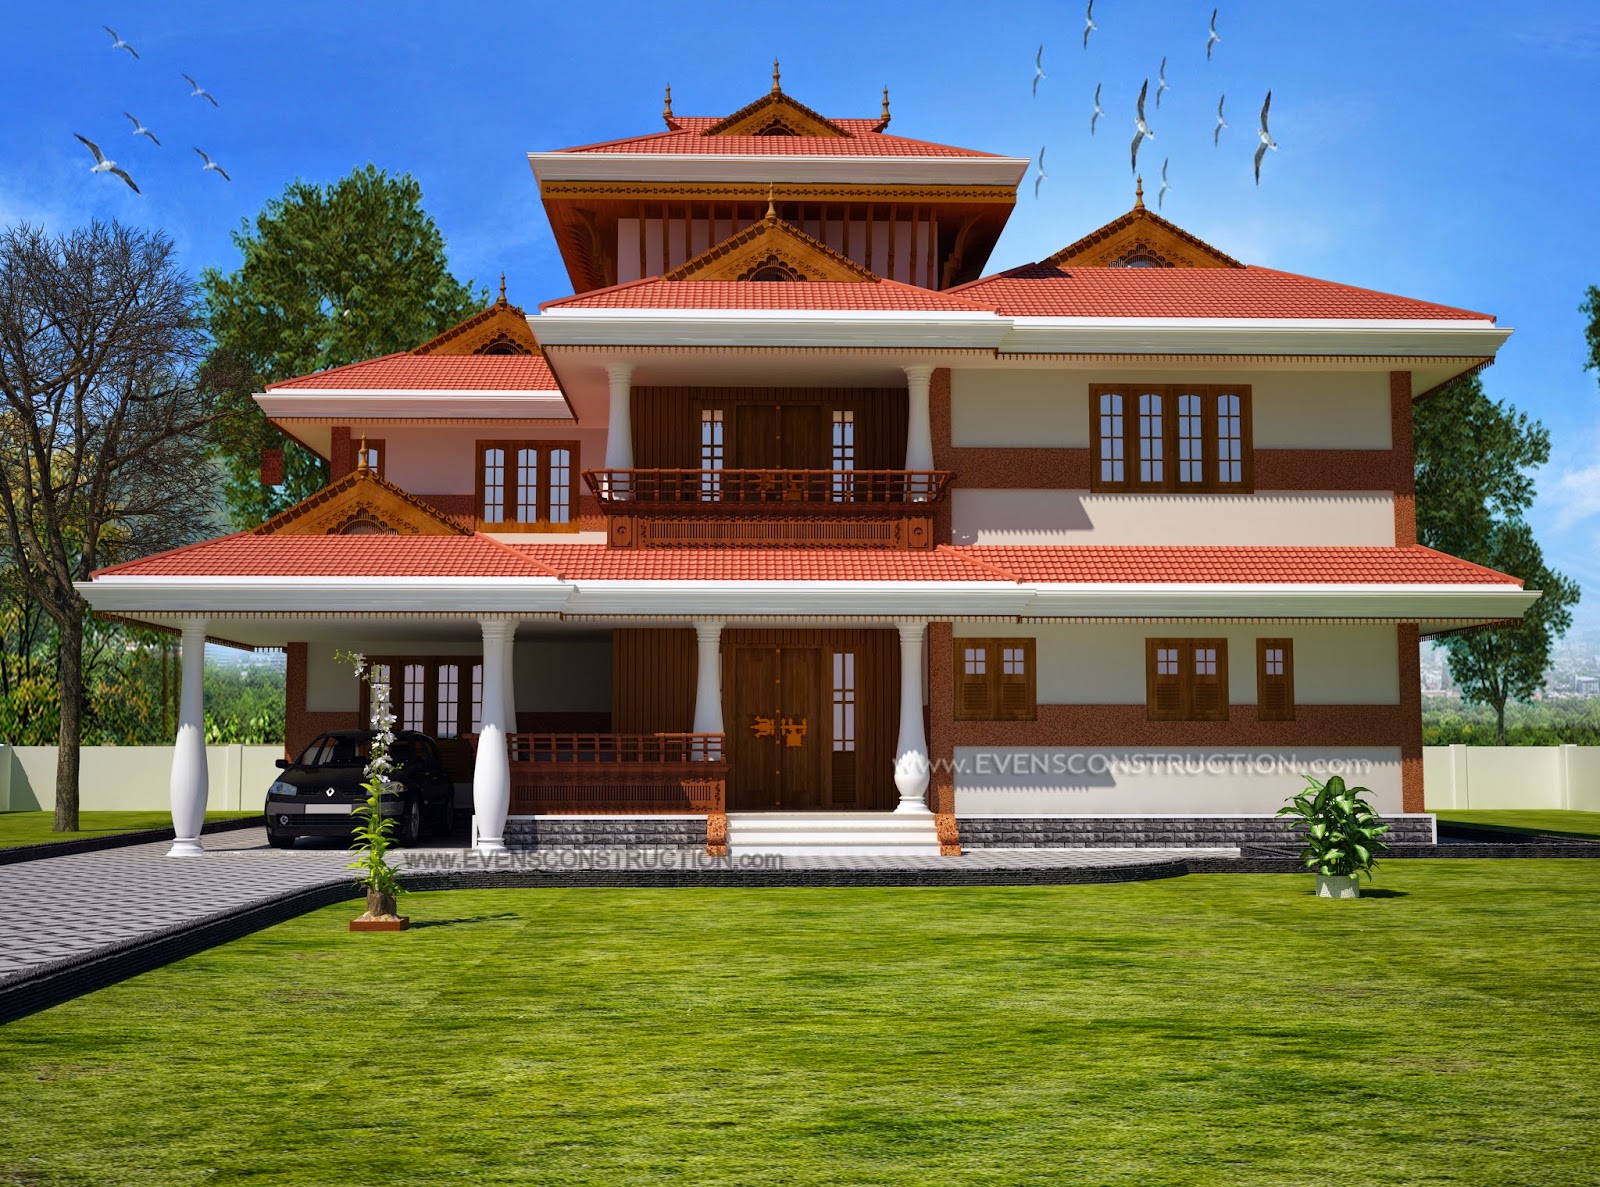 Traditional style Kerala house | home